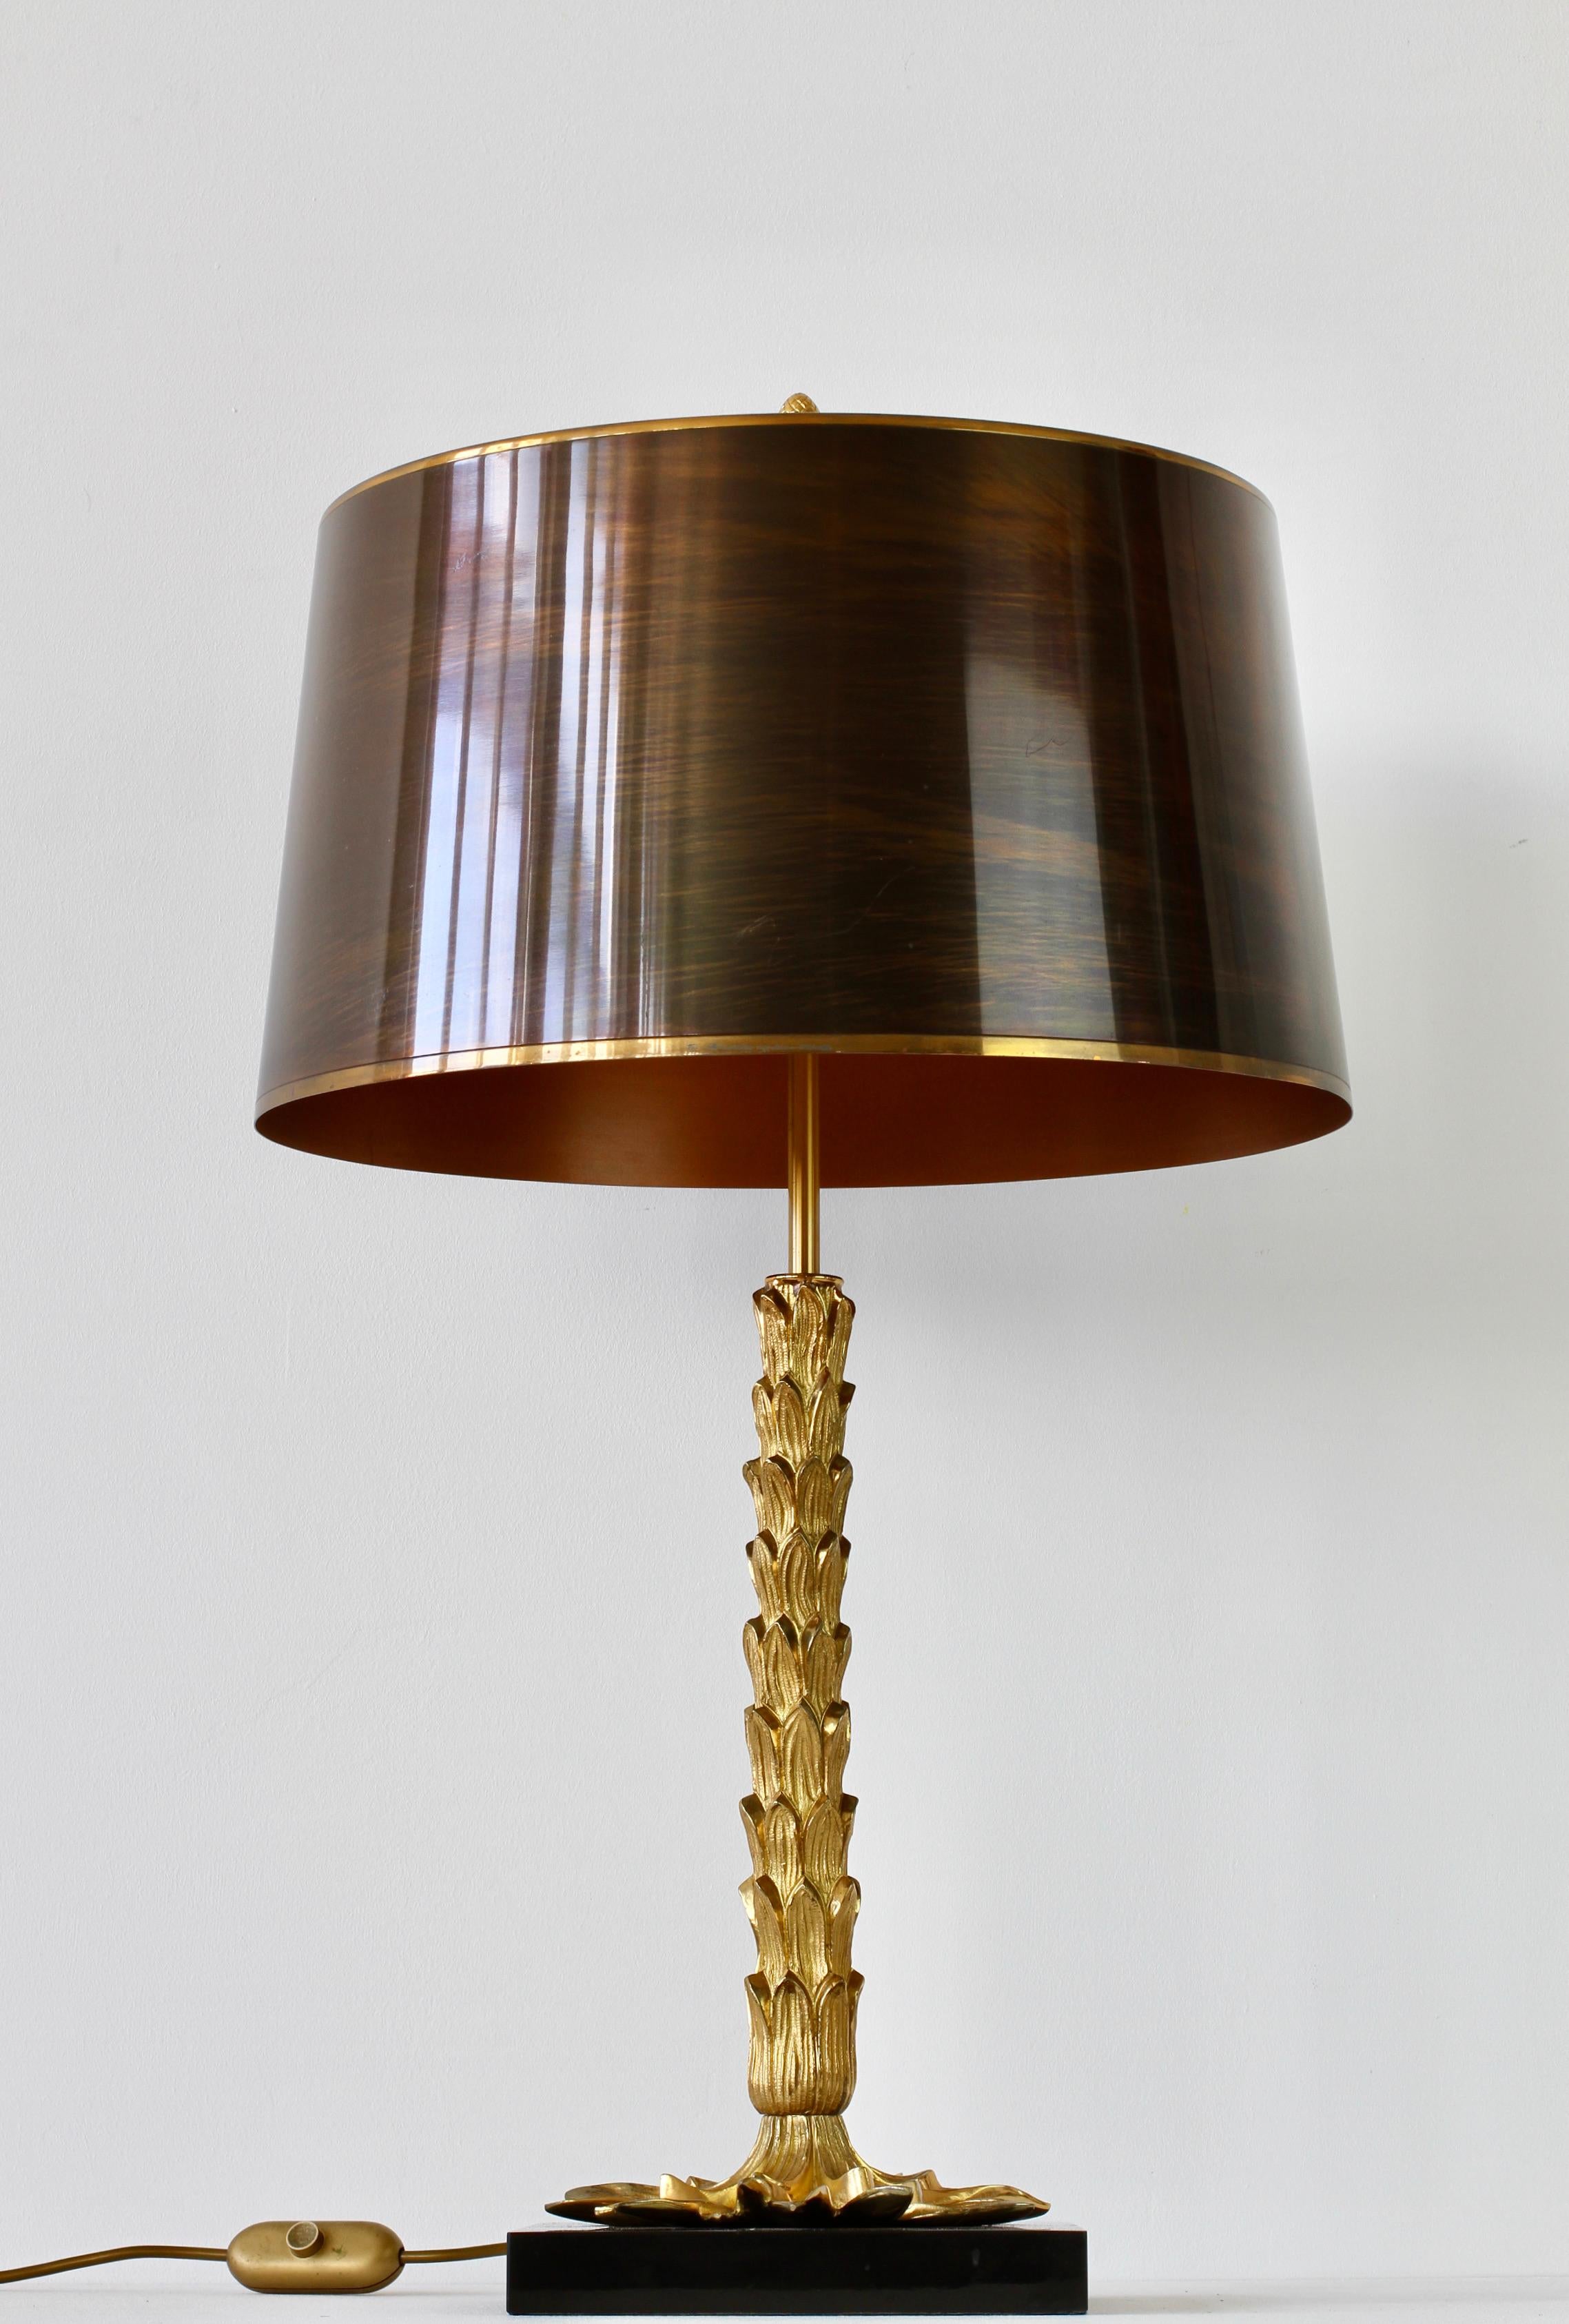 Jean Charles for Maison Charles exceptionally rare and very large tall gold-plated cast brass/bronze table lamp with original brass & bronze metal shade. This is an early example which is mounted on a marble base - the later models where set on